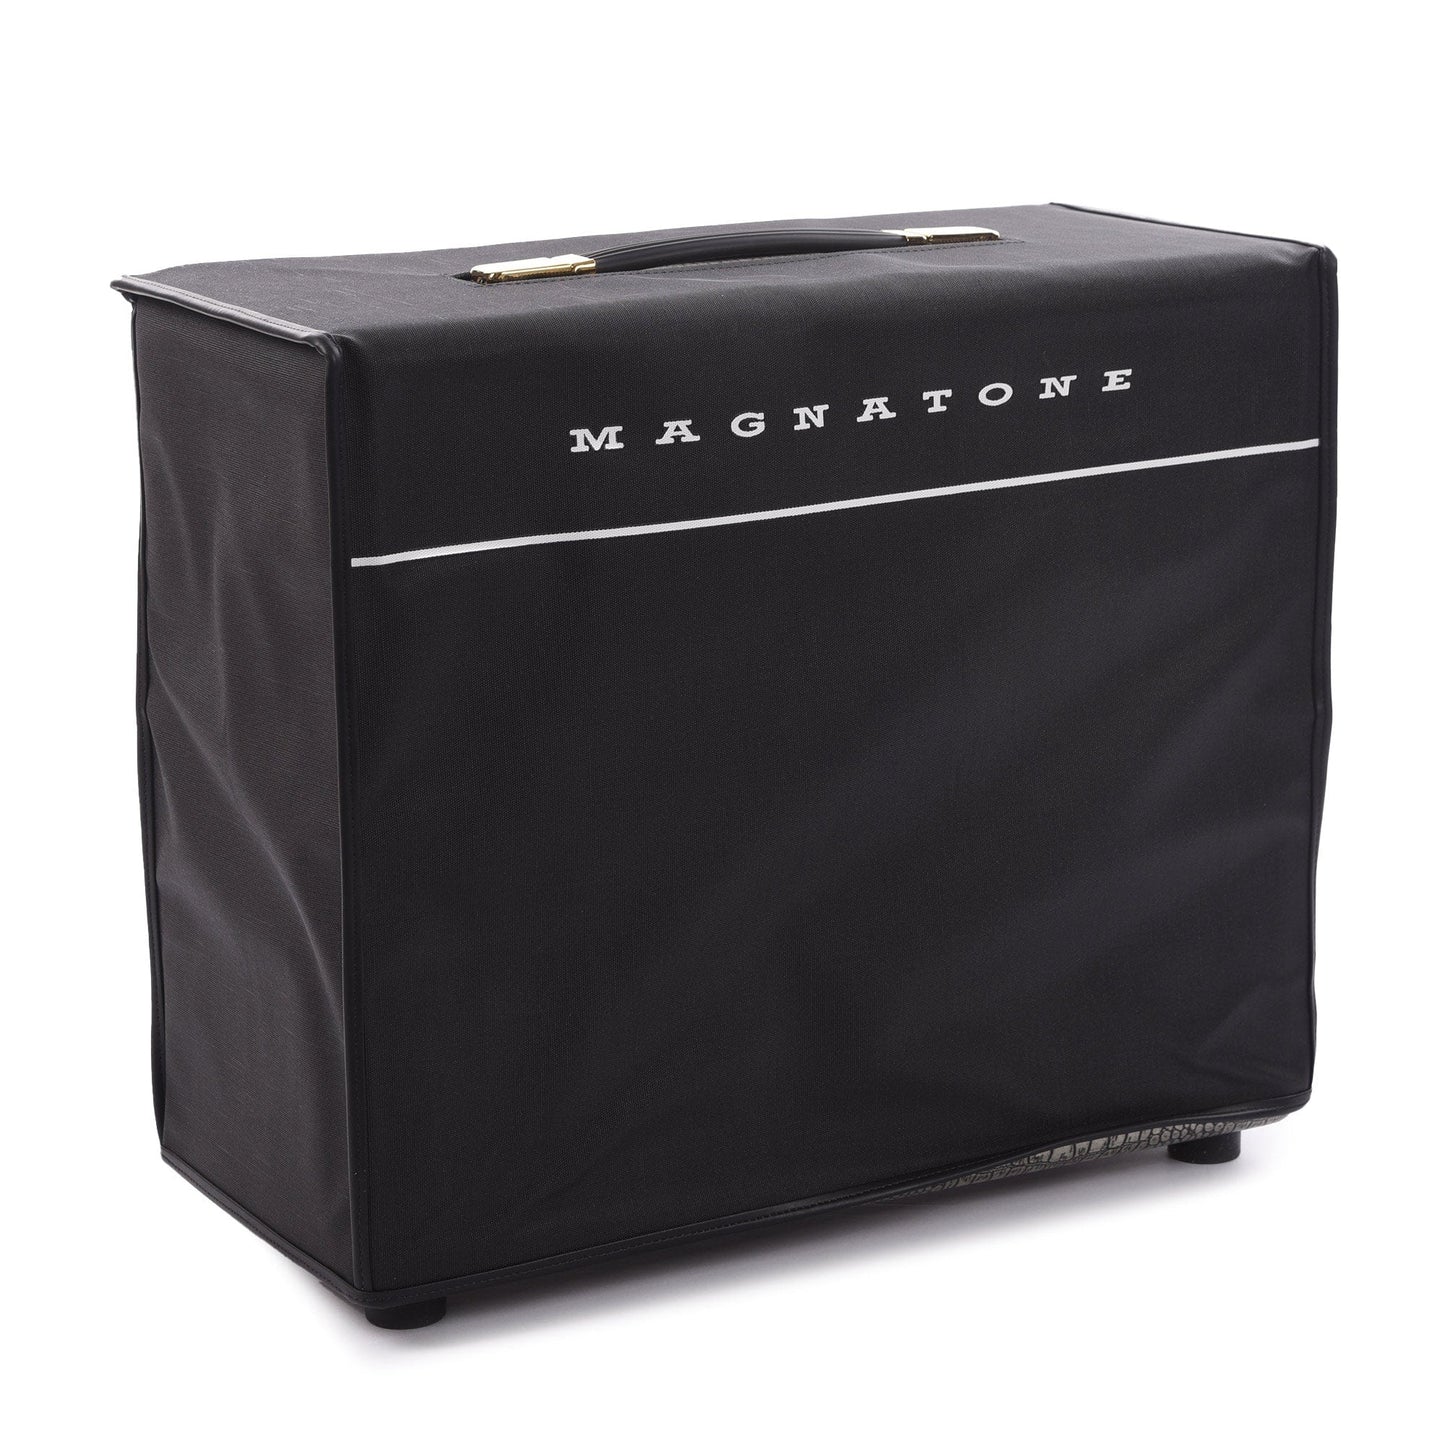 Magnatone 1x12" Super Fifteen Extension Cabinet Croc Collection Gold Amps / Guitar Cabinets